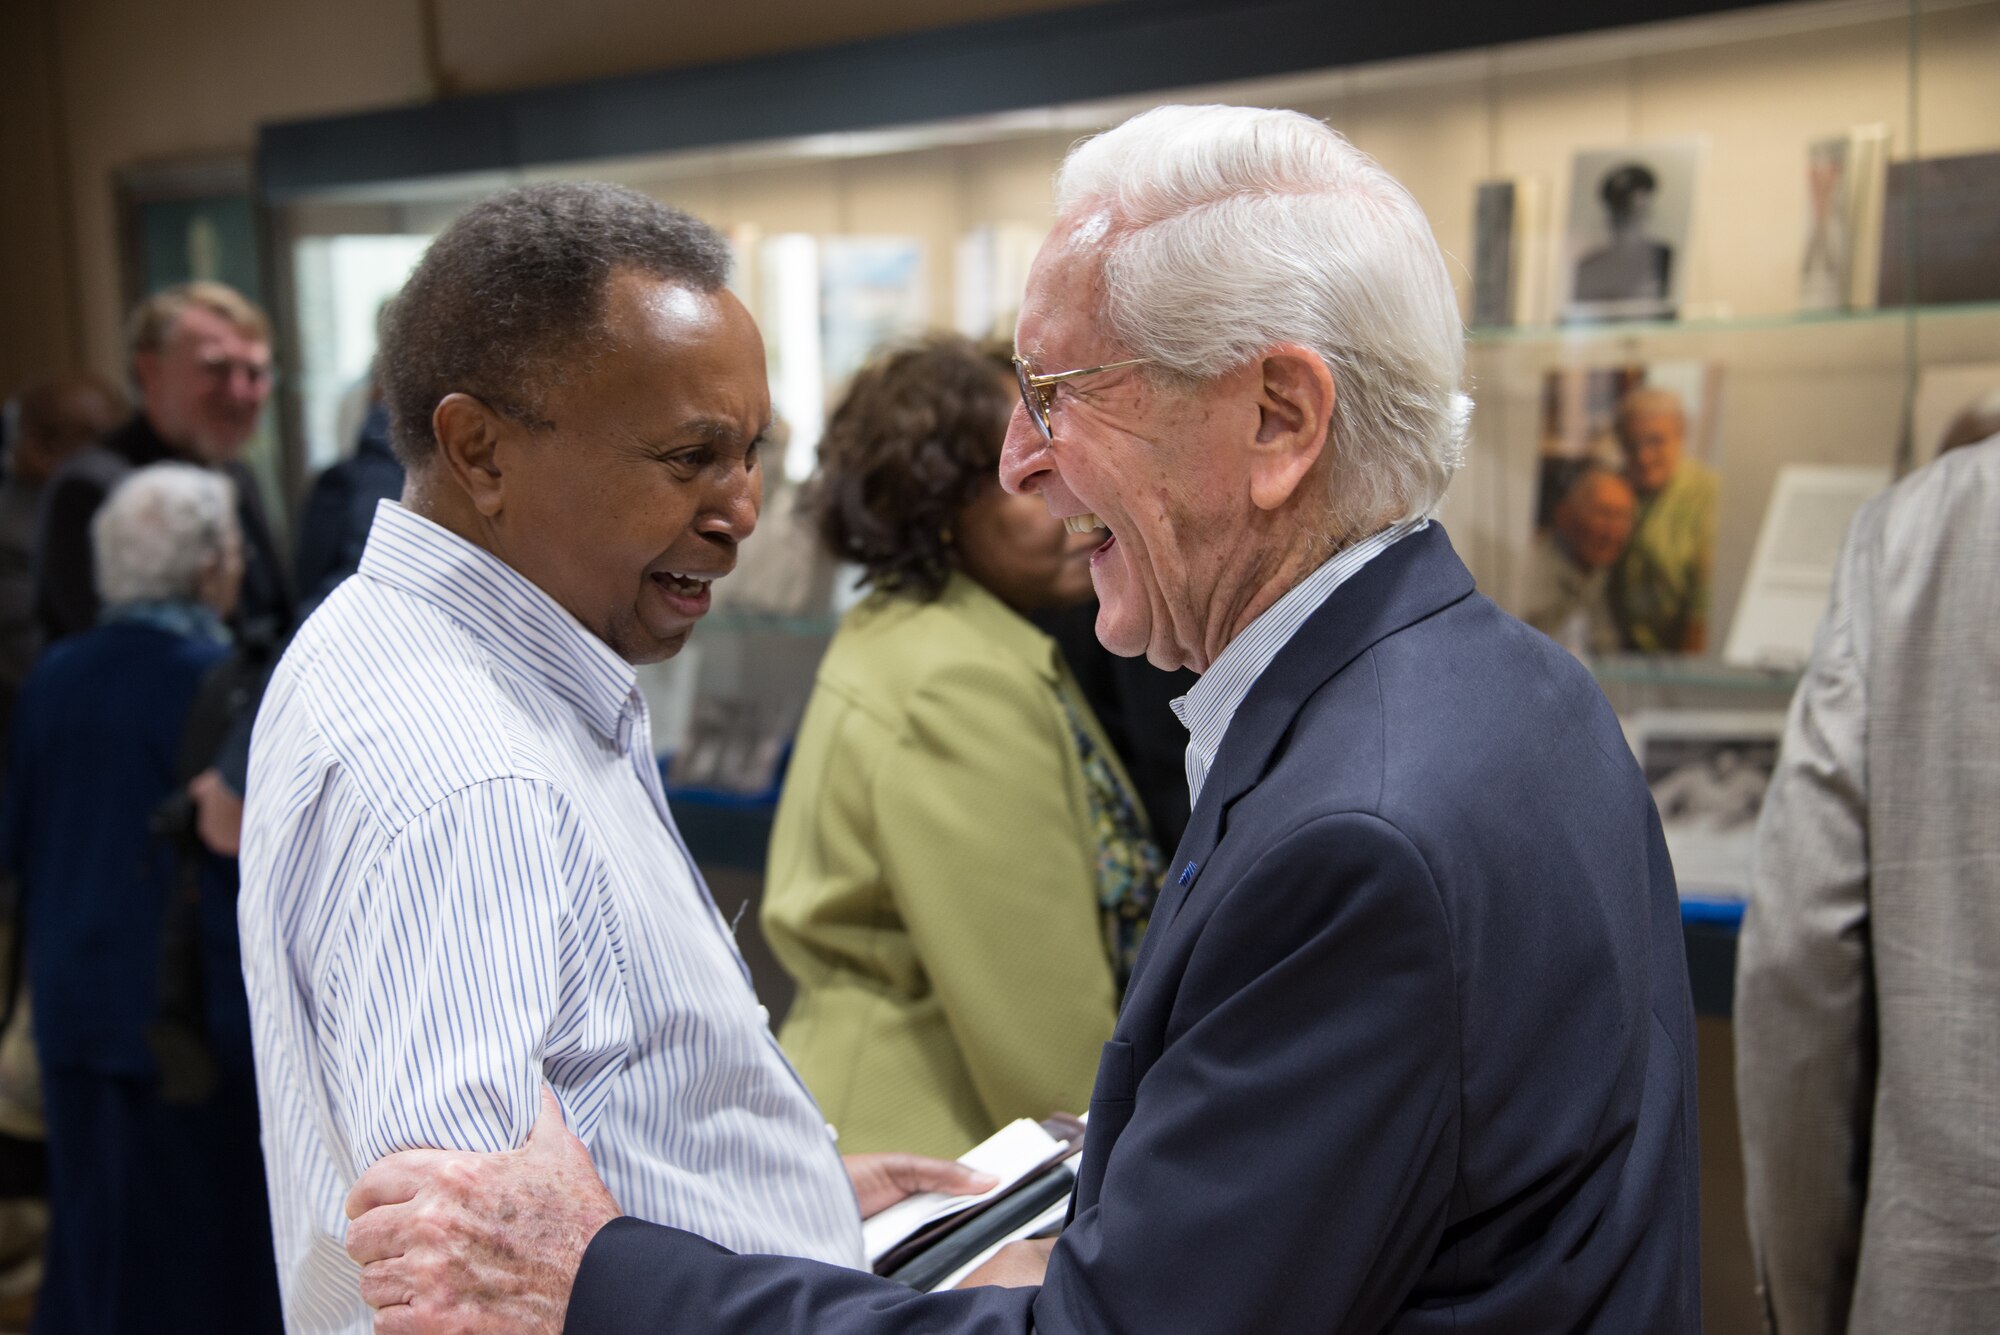 Two attendees of the “Maxwell and the Movement” exhibit catch up with one another at the Muir S. Fairchild Research Information Center, Feb. 21, 2019, Maxwell Air Force Base, Alabama. The attendees of the event included people from the base and Montgomery communities and even as far as Atlanta. (U.S. Air Force photo by Senior Airman Francisco Melendez – Espinosa)